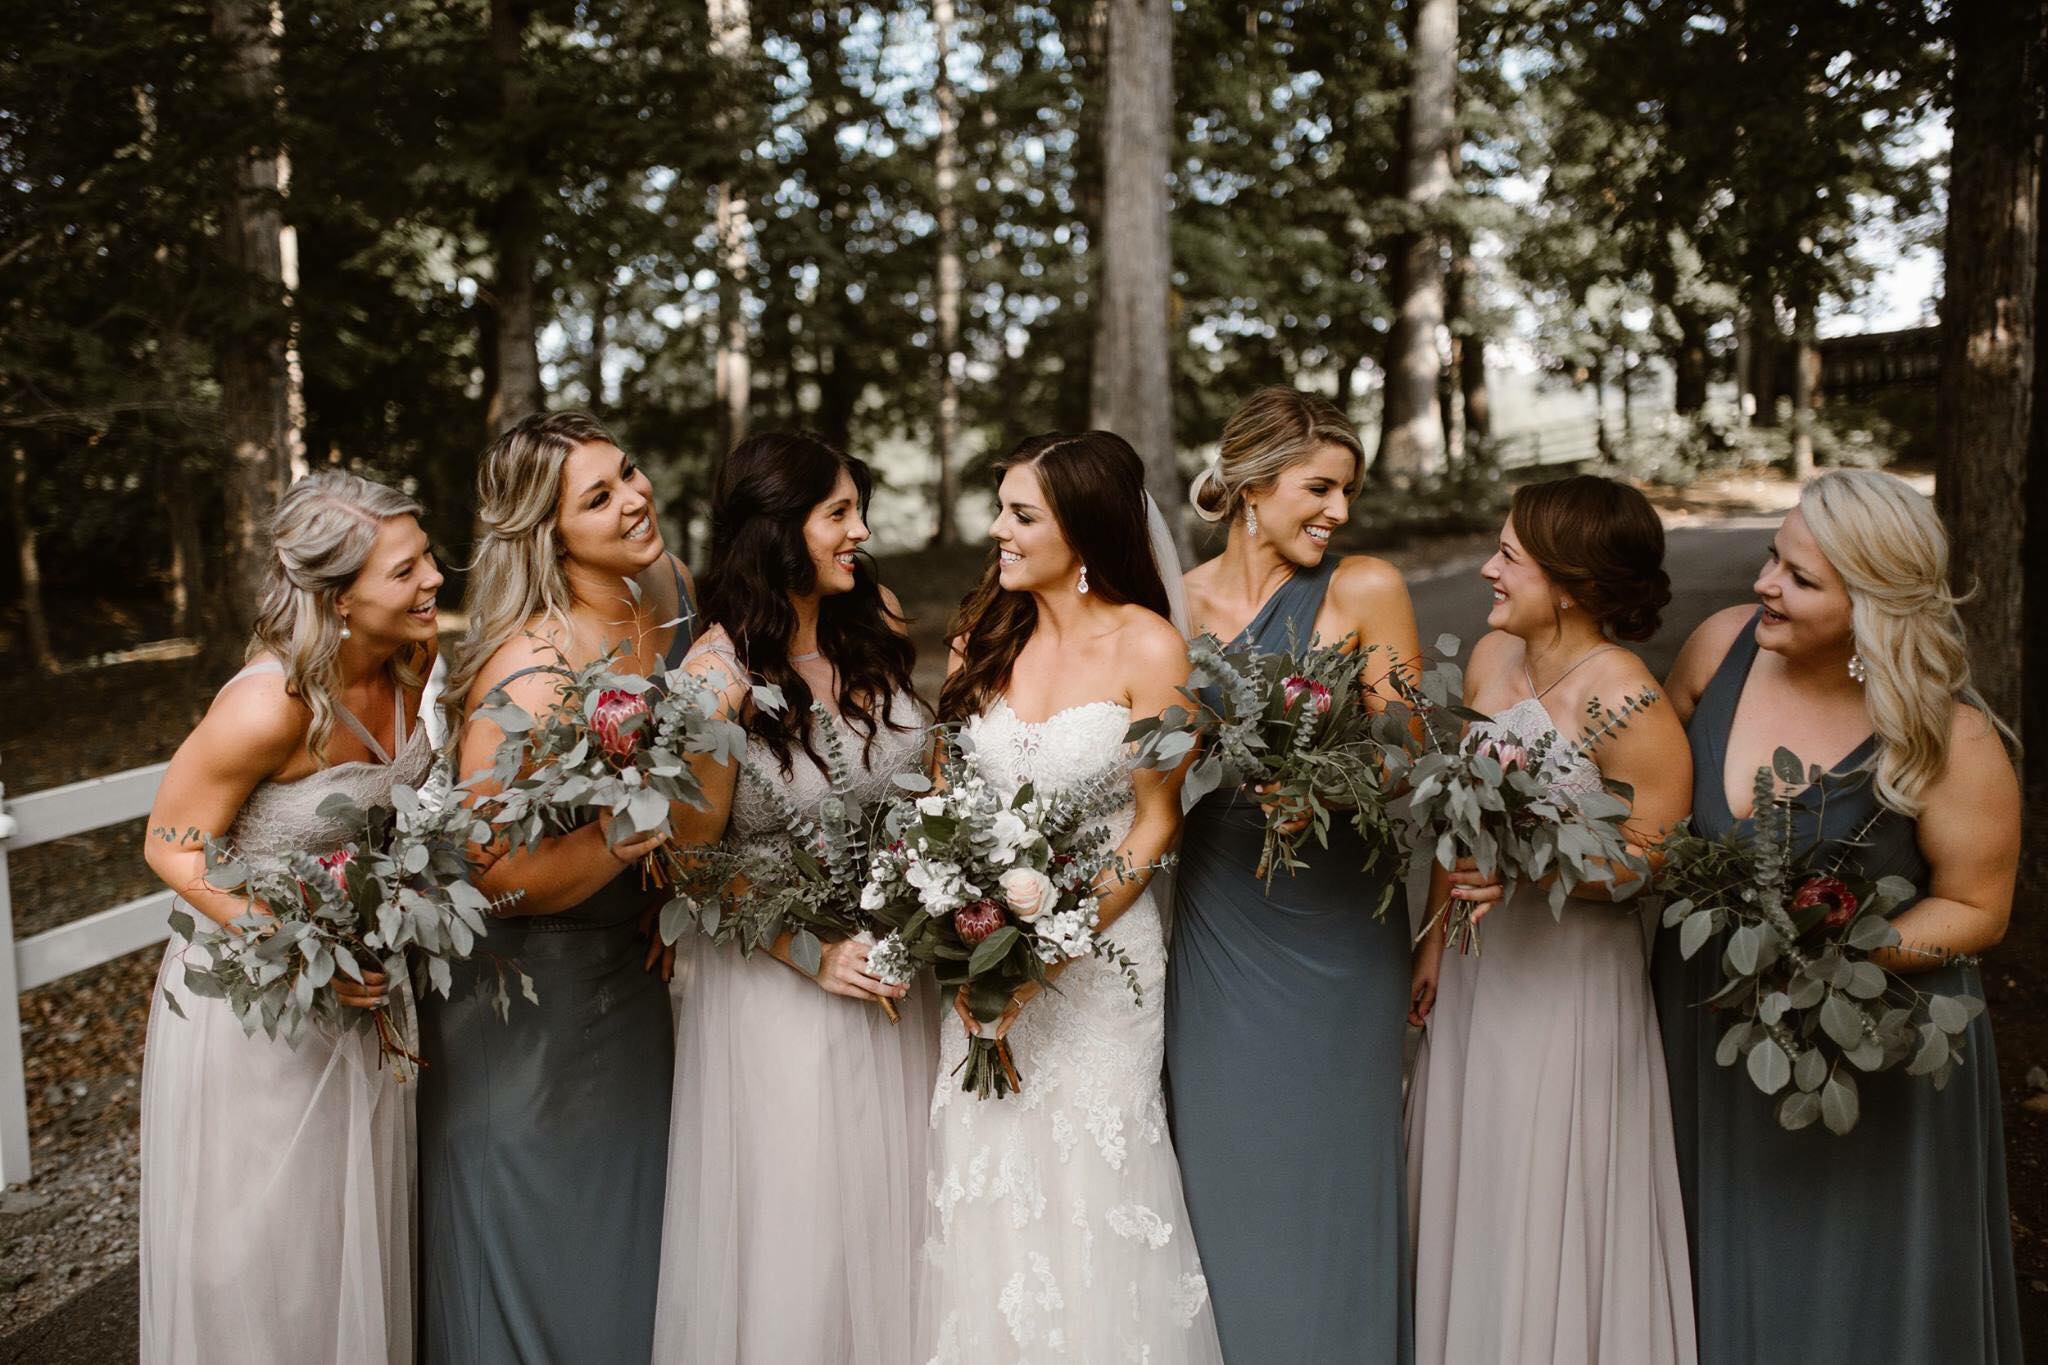 Bride and bridesmaids with bouquets by Swank Floral and Erin Morrison photography | The Pink Bride® www.thepinkbride.com